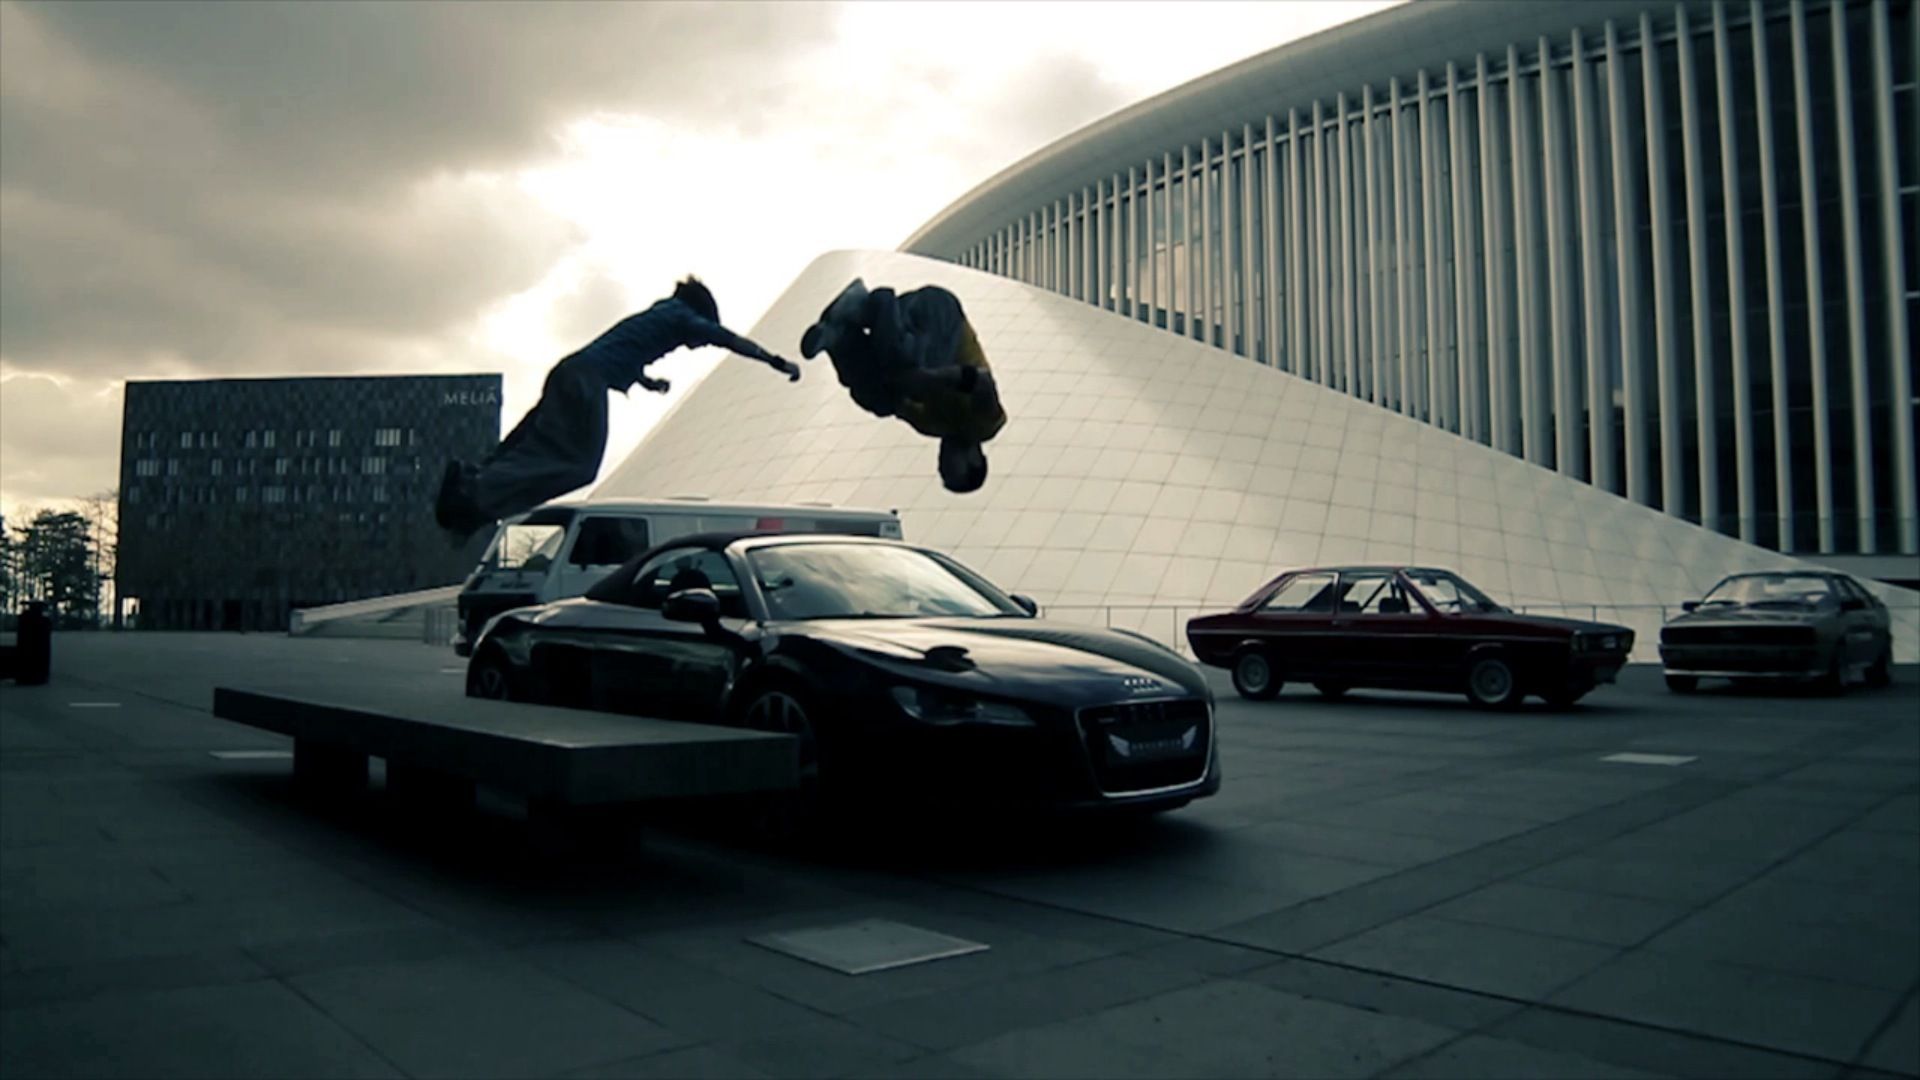 Parkour in the parking lot wallpapers and images - wallpapers ...